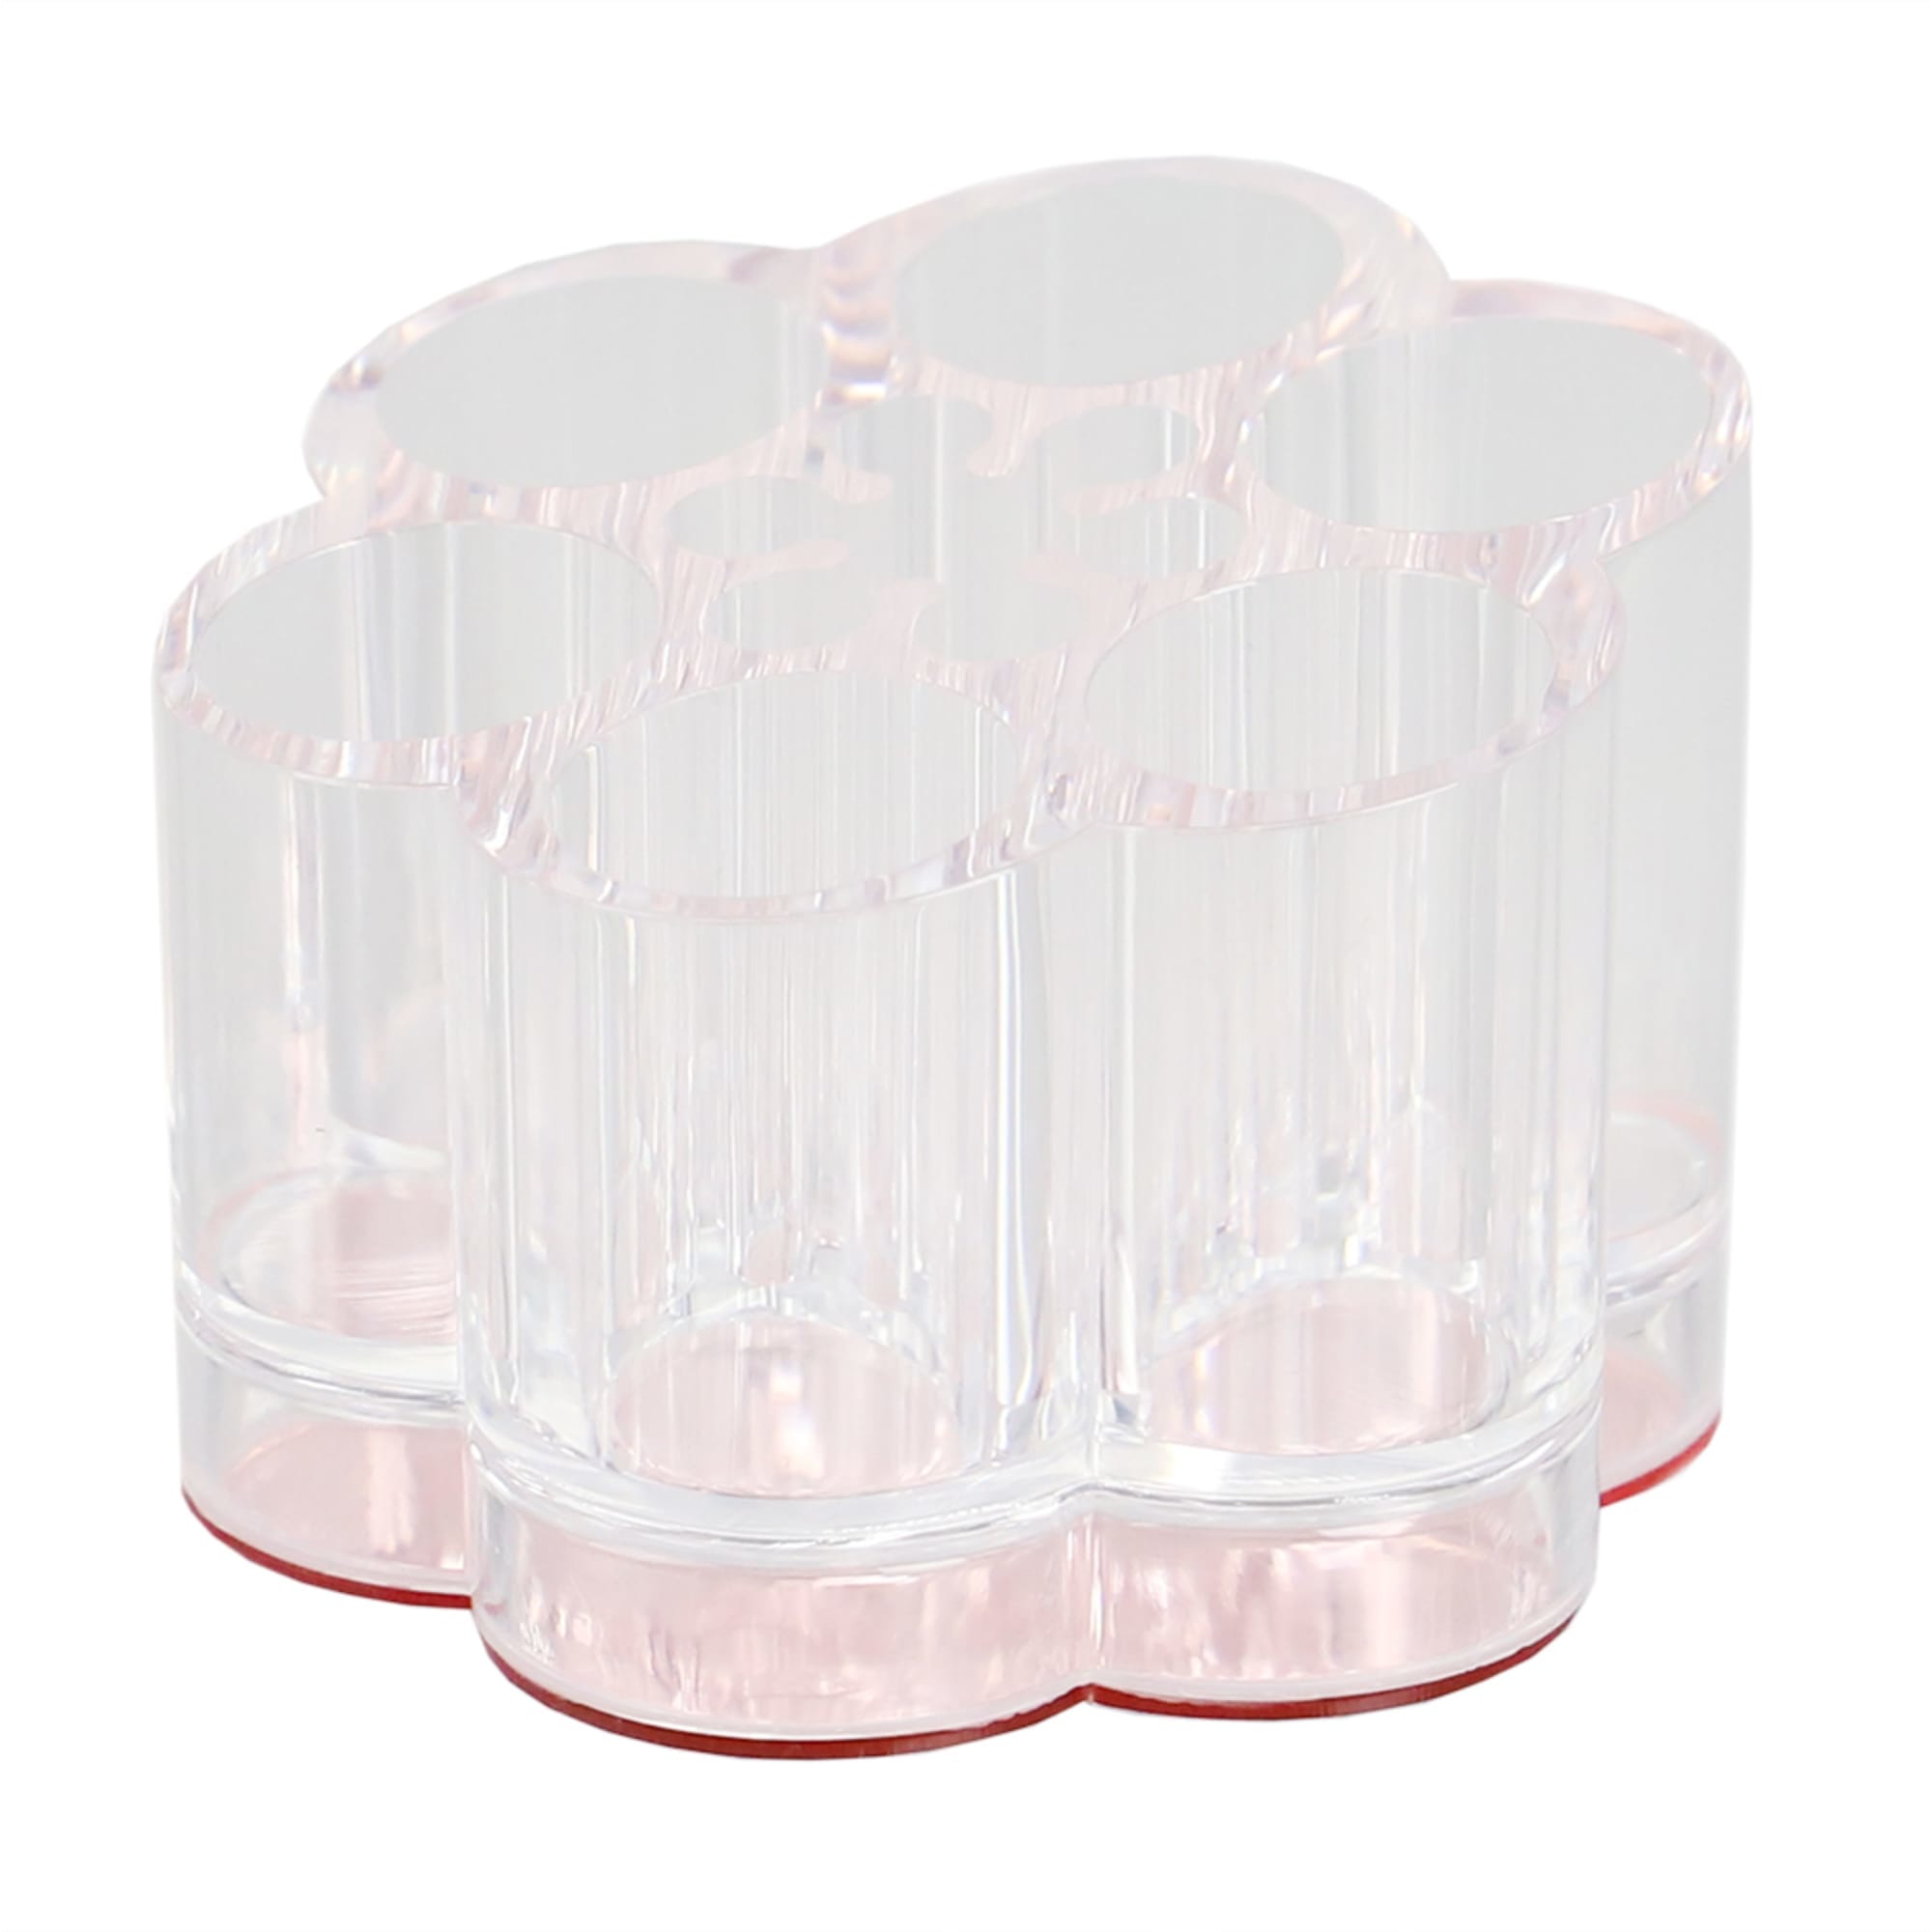 Home Basics Round Plastic Cosmetic Organizer with Rose Bottom $3.00 EACH, CASE PACK OF 12